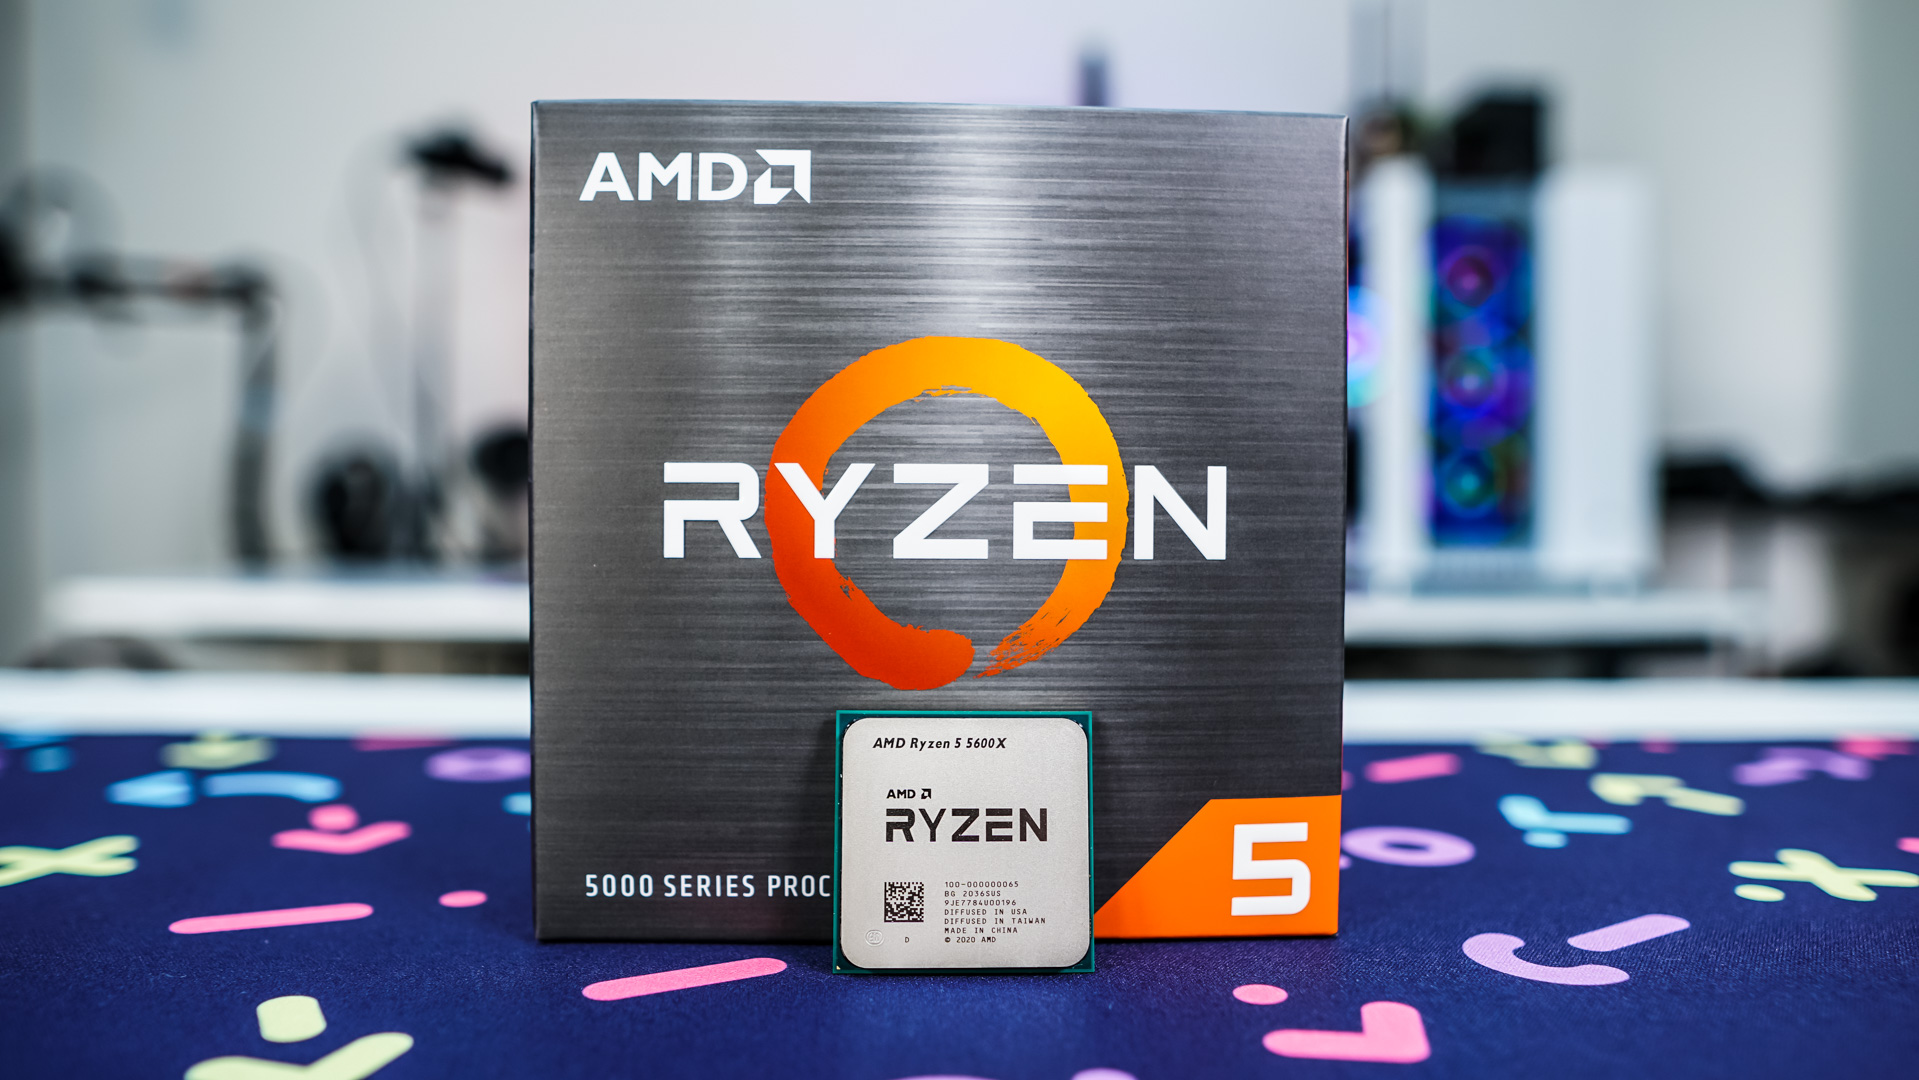 AMD Ryzen 5 5600X Processor Review | Page 8 of 10 | ThinkComputers.org